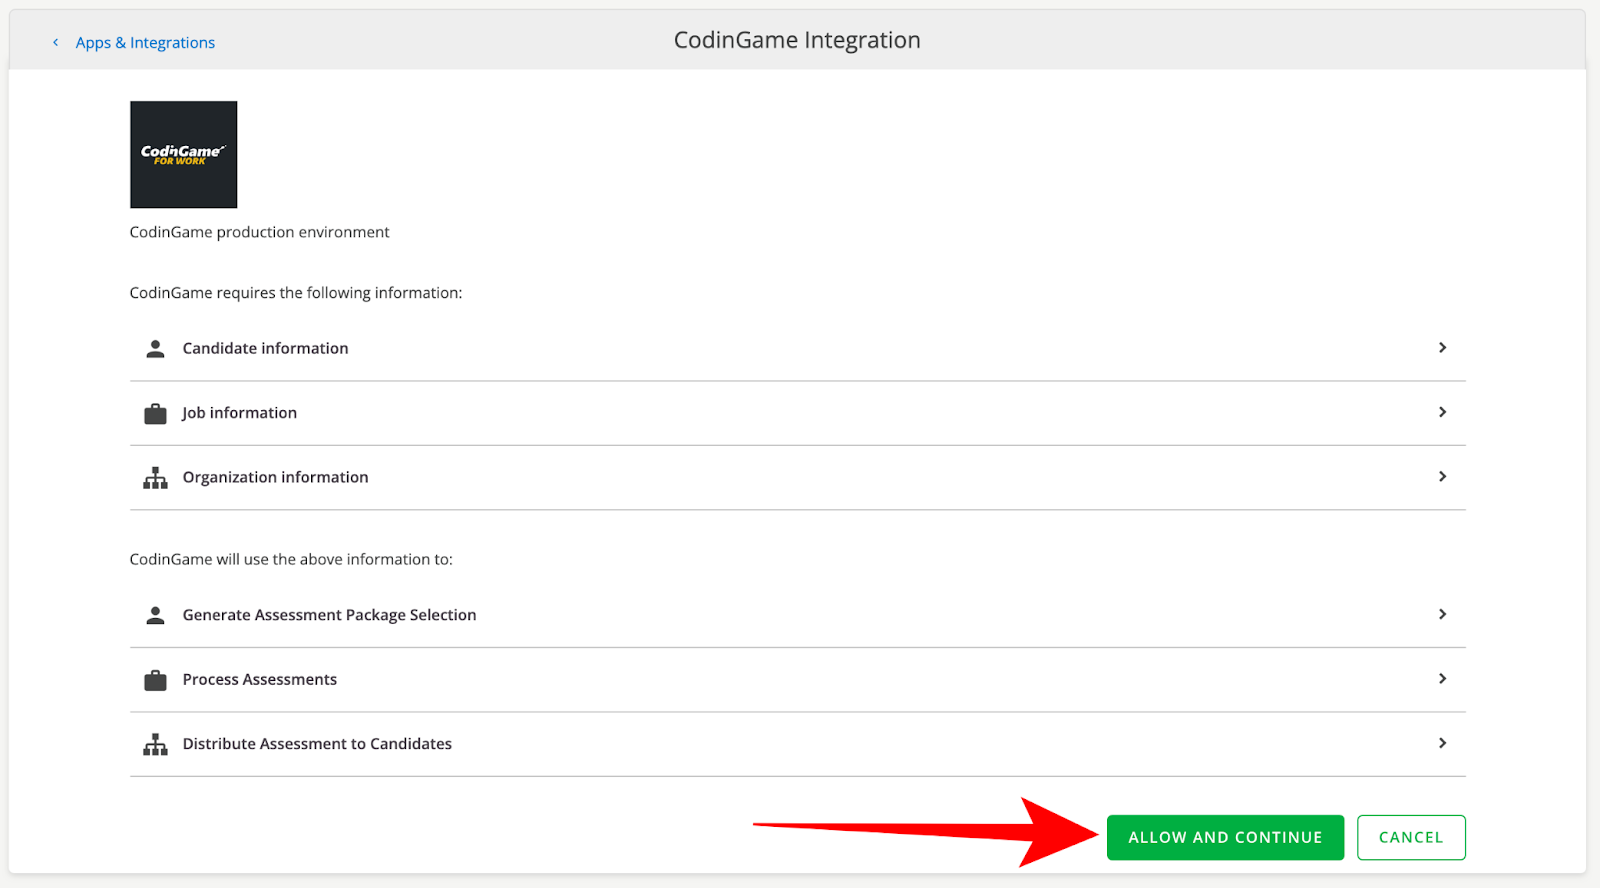 The codingame integration page in smartrecruiters is shown with an arrow pointing to "allow and continue".